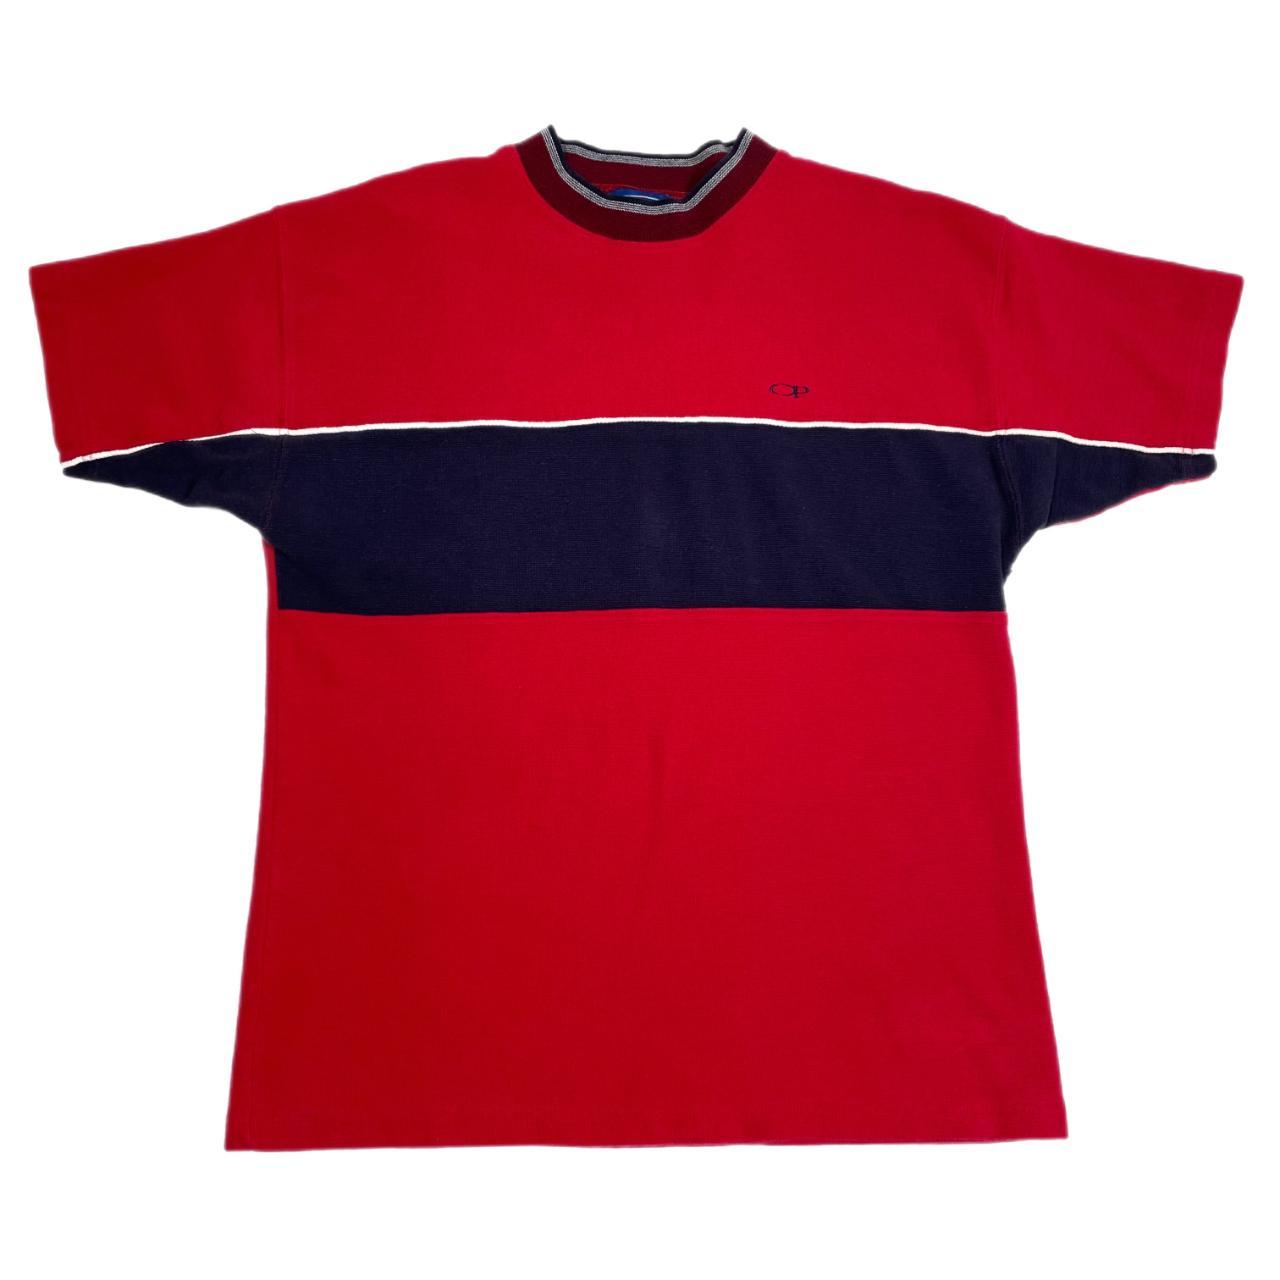 Ocean Pacific Men's Red and Navy T-shirt